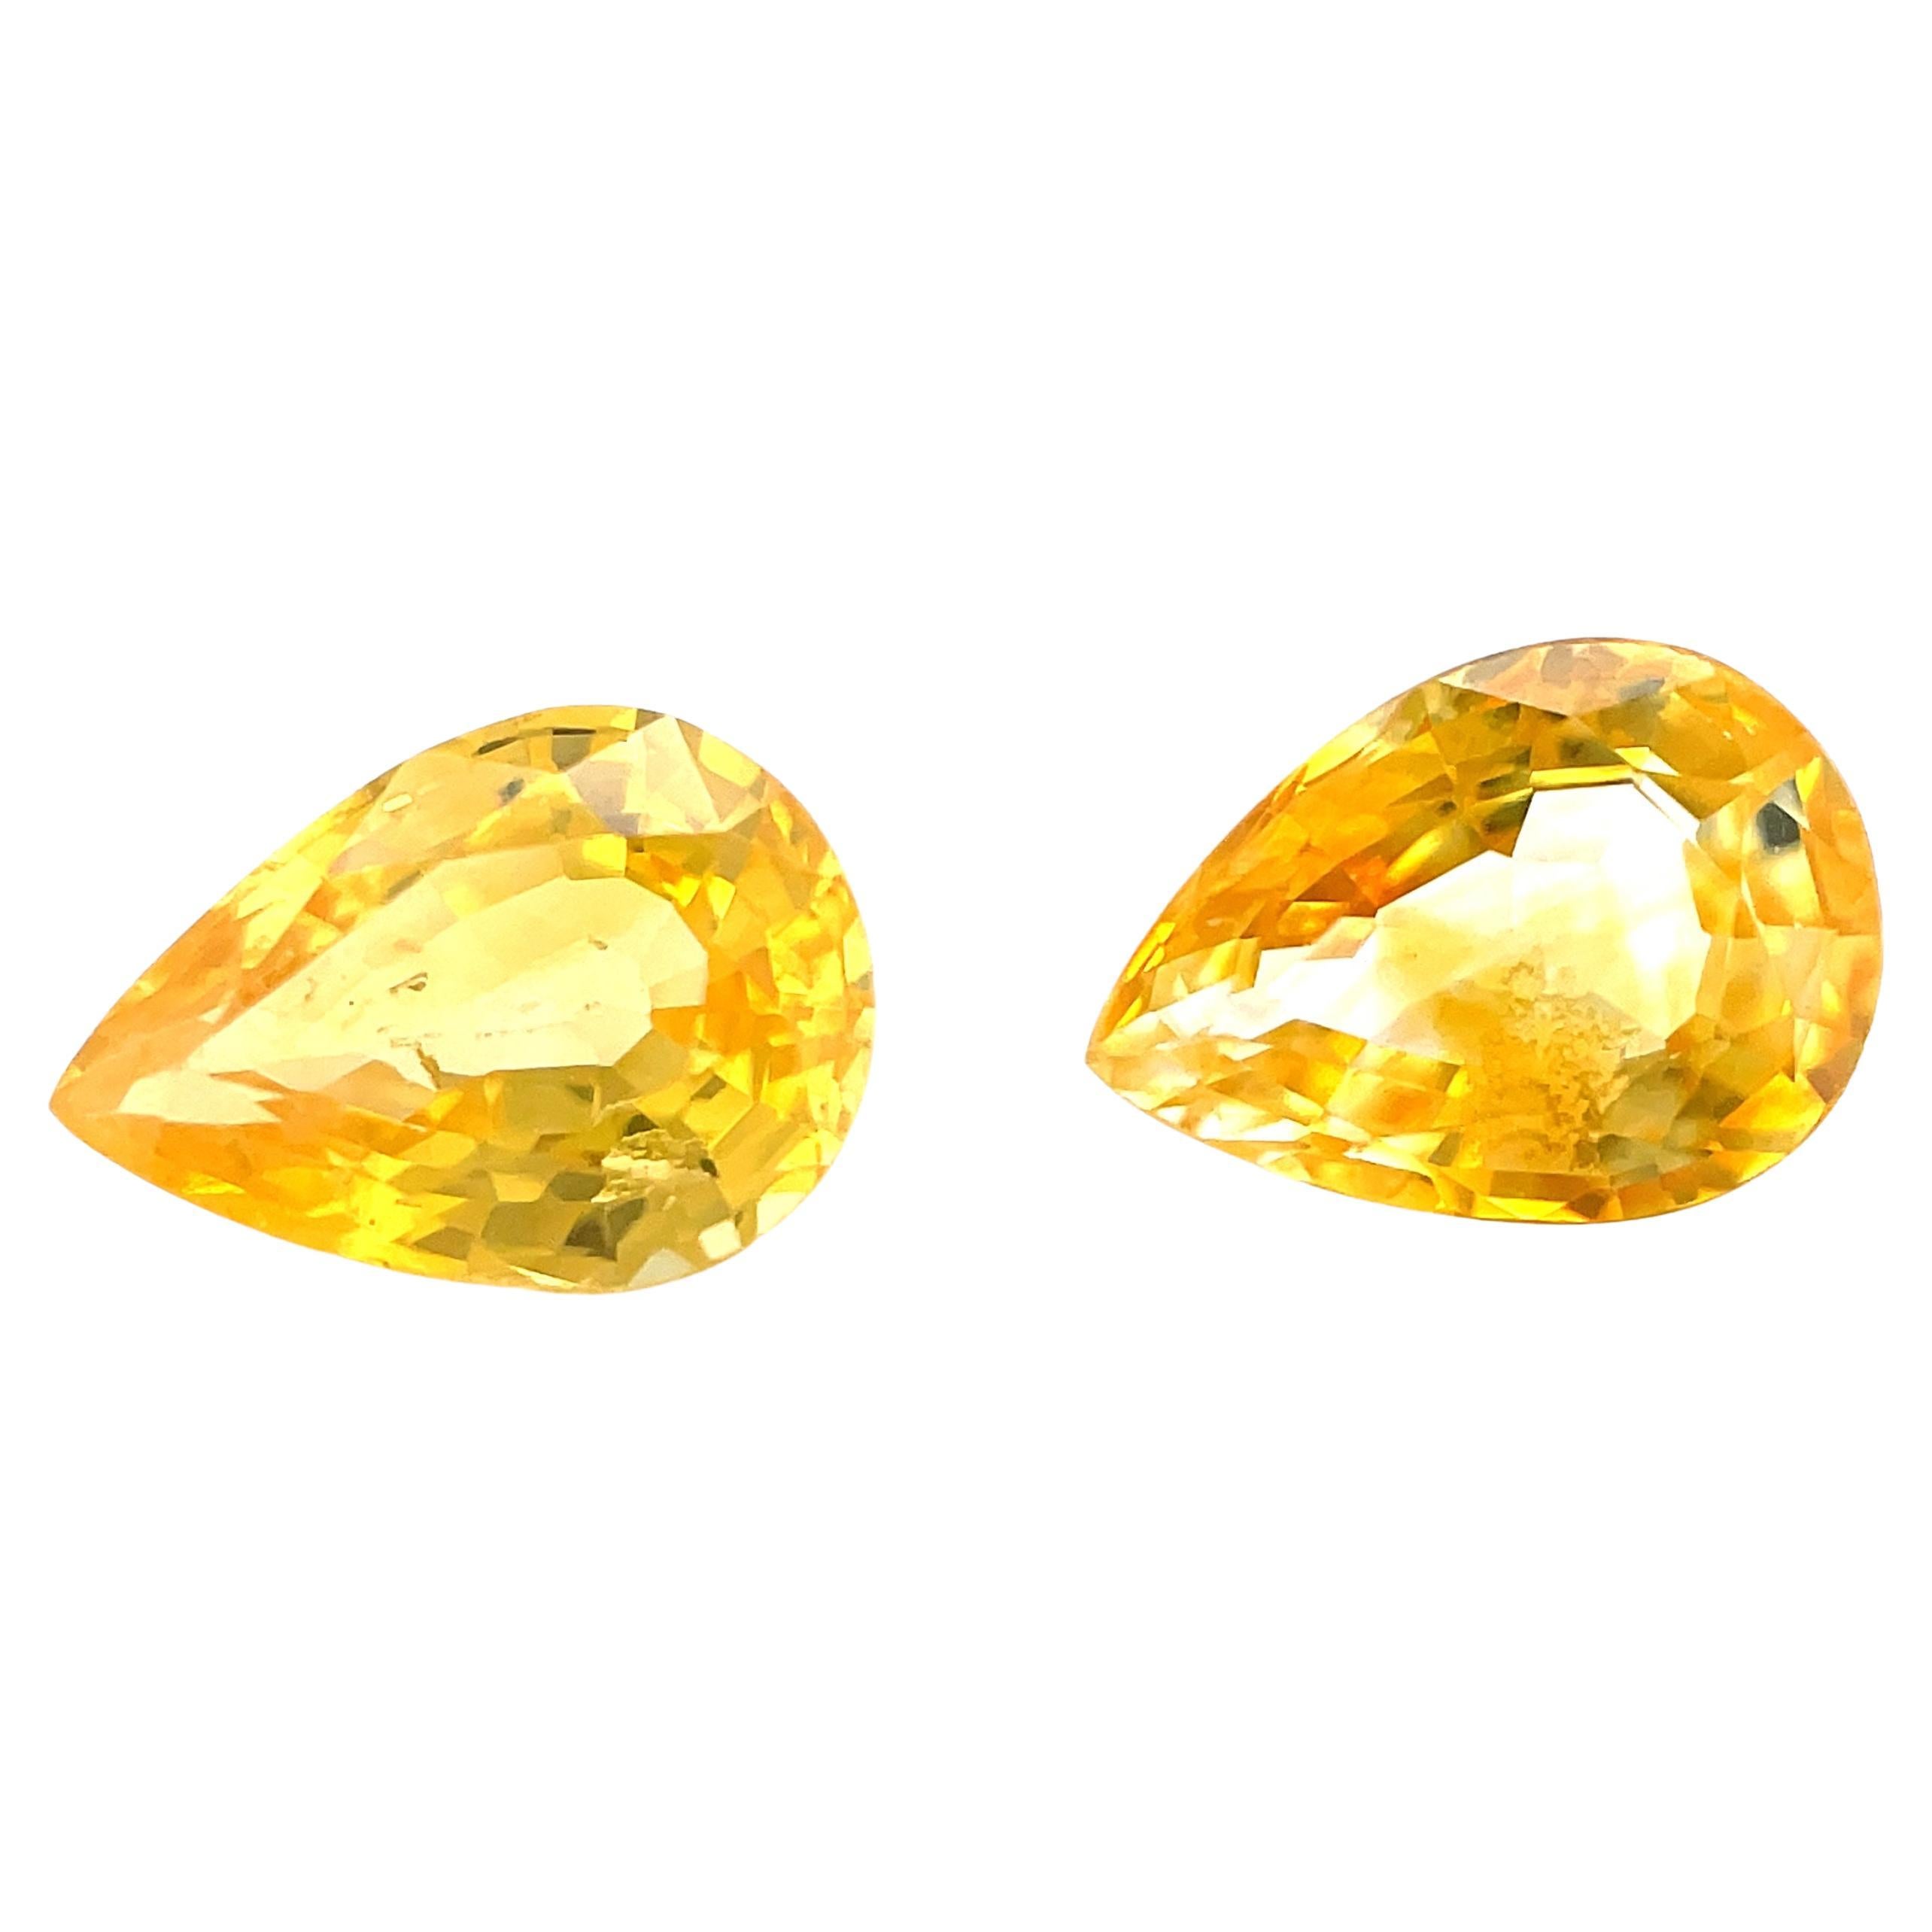 1.70 Carat Total Pair of Pear Shaped Yellow Sapphires for Earrings, Loose Gems For Sale